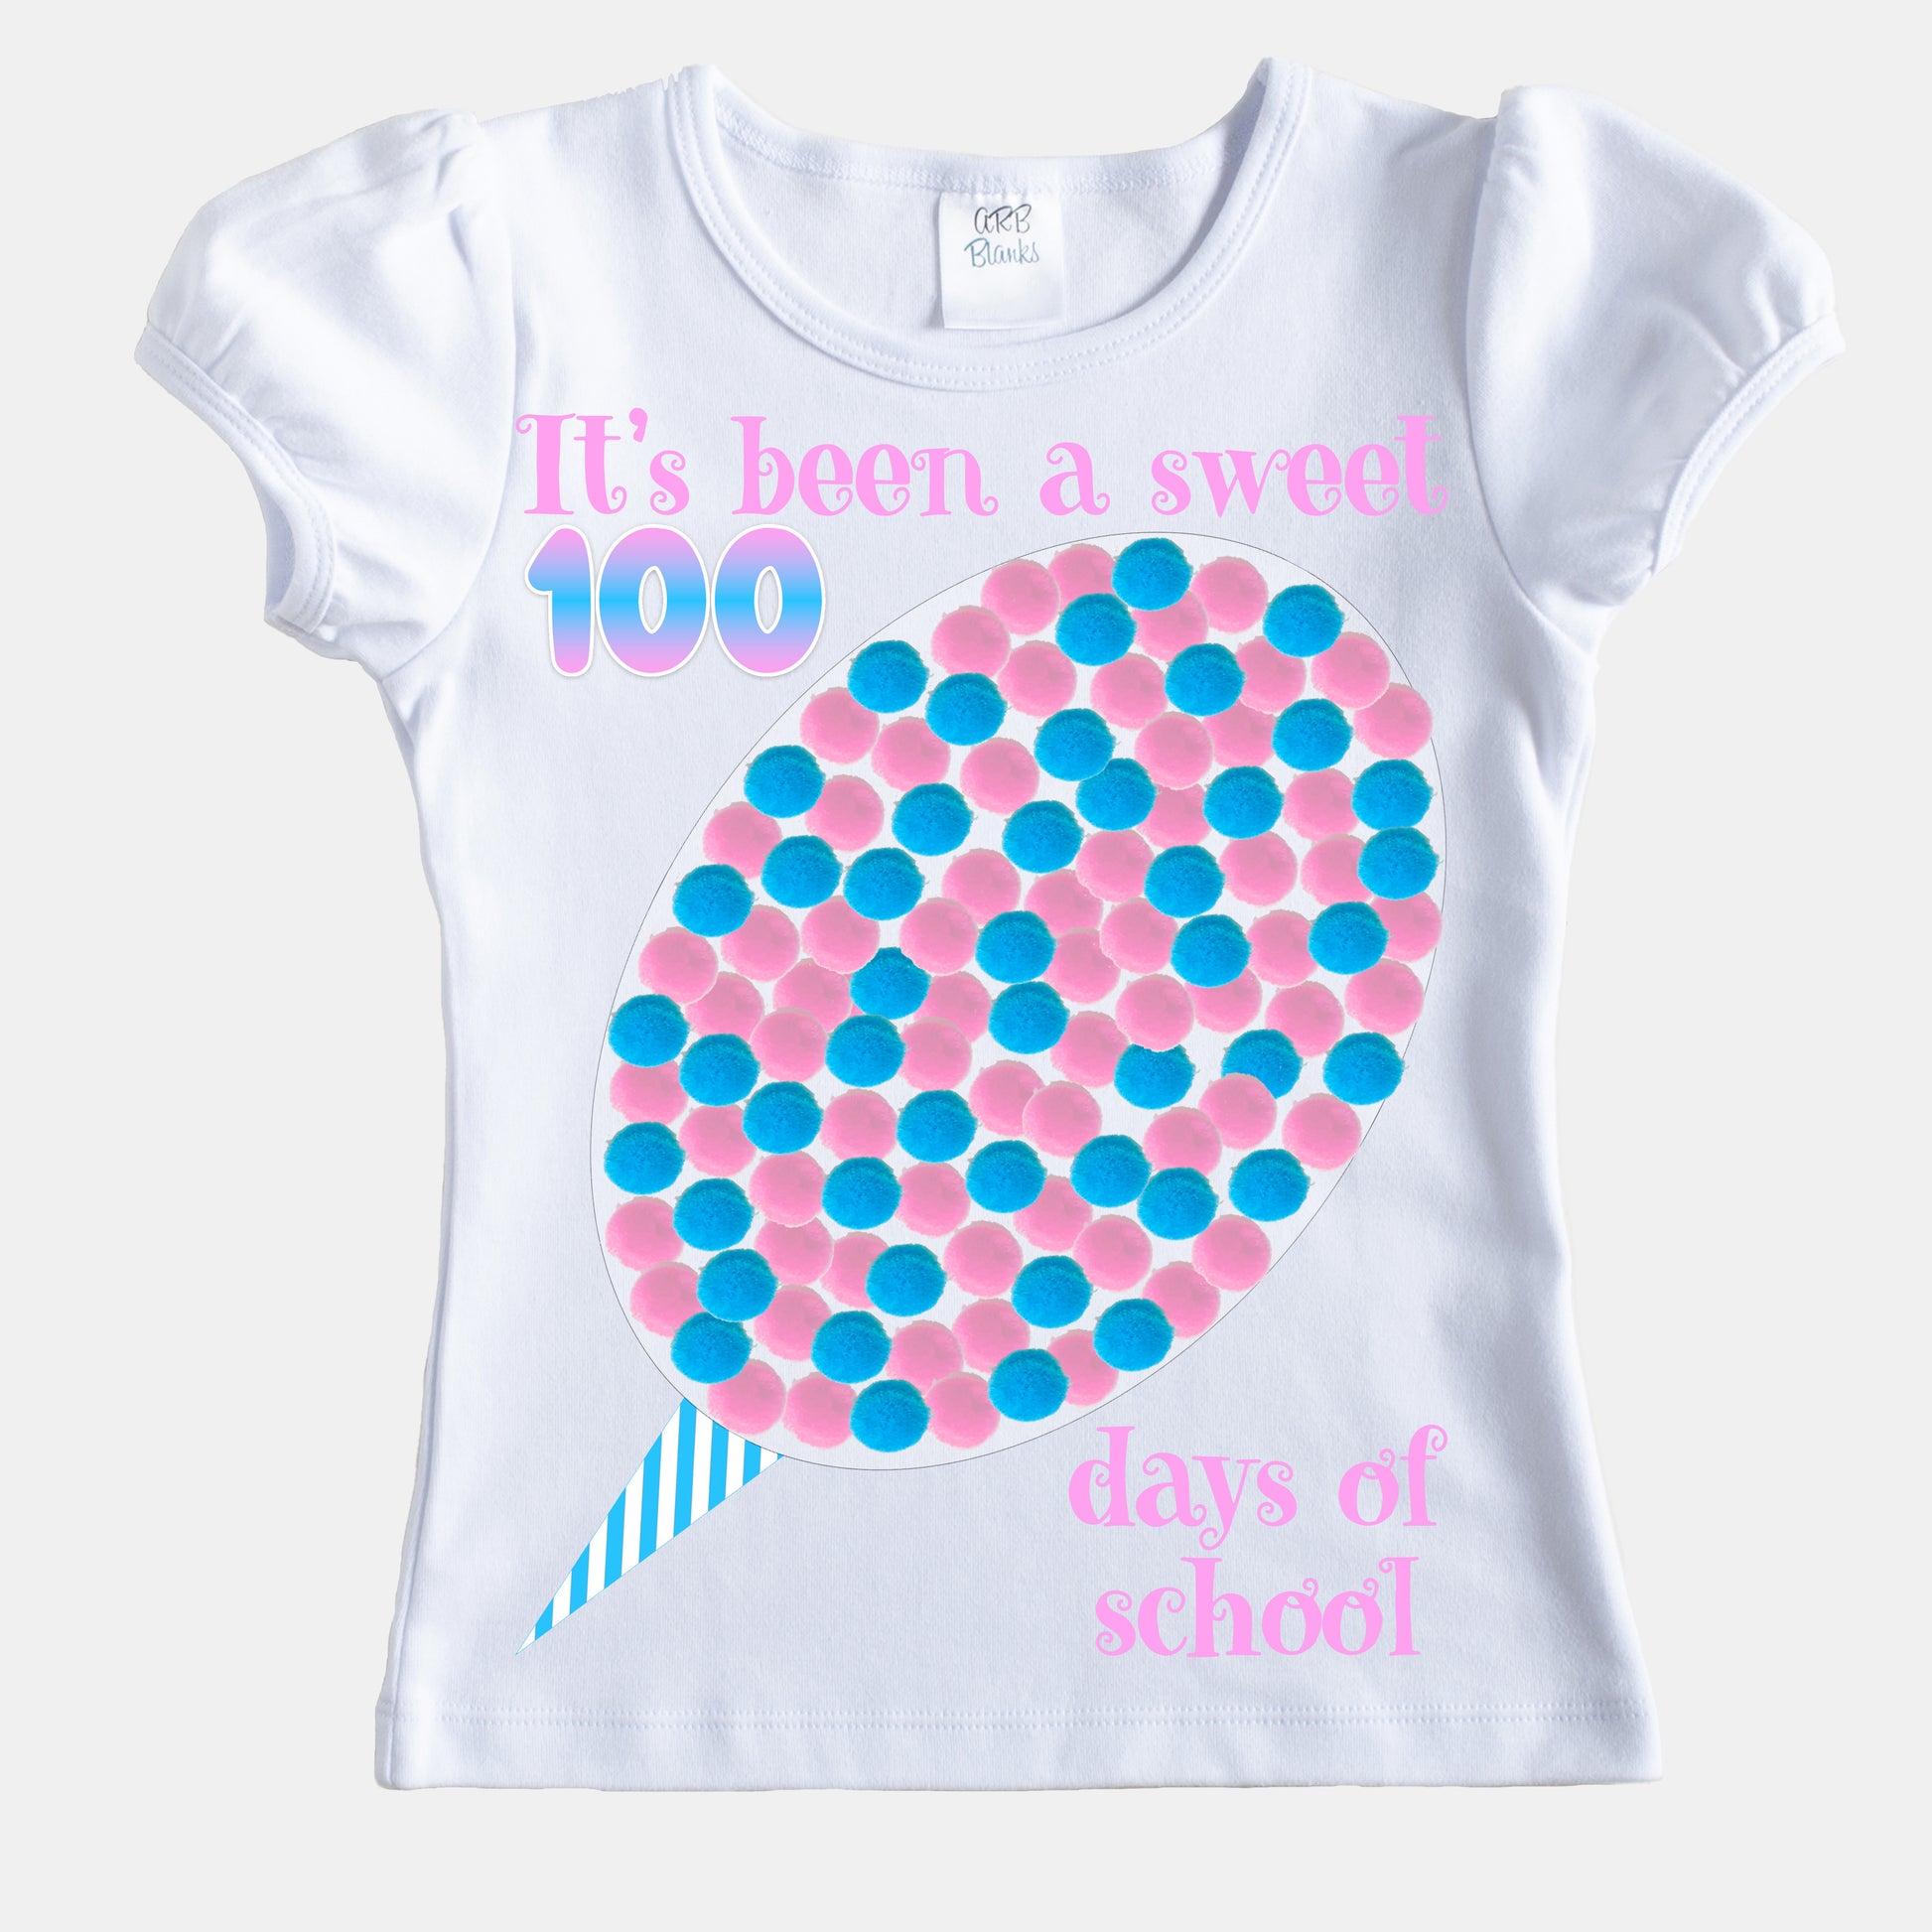 DIY 100th day of school shirt kit cotton candy